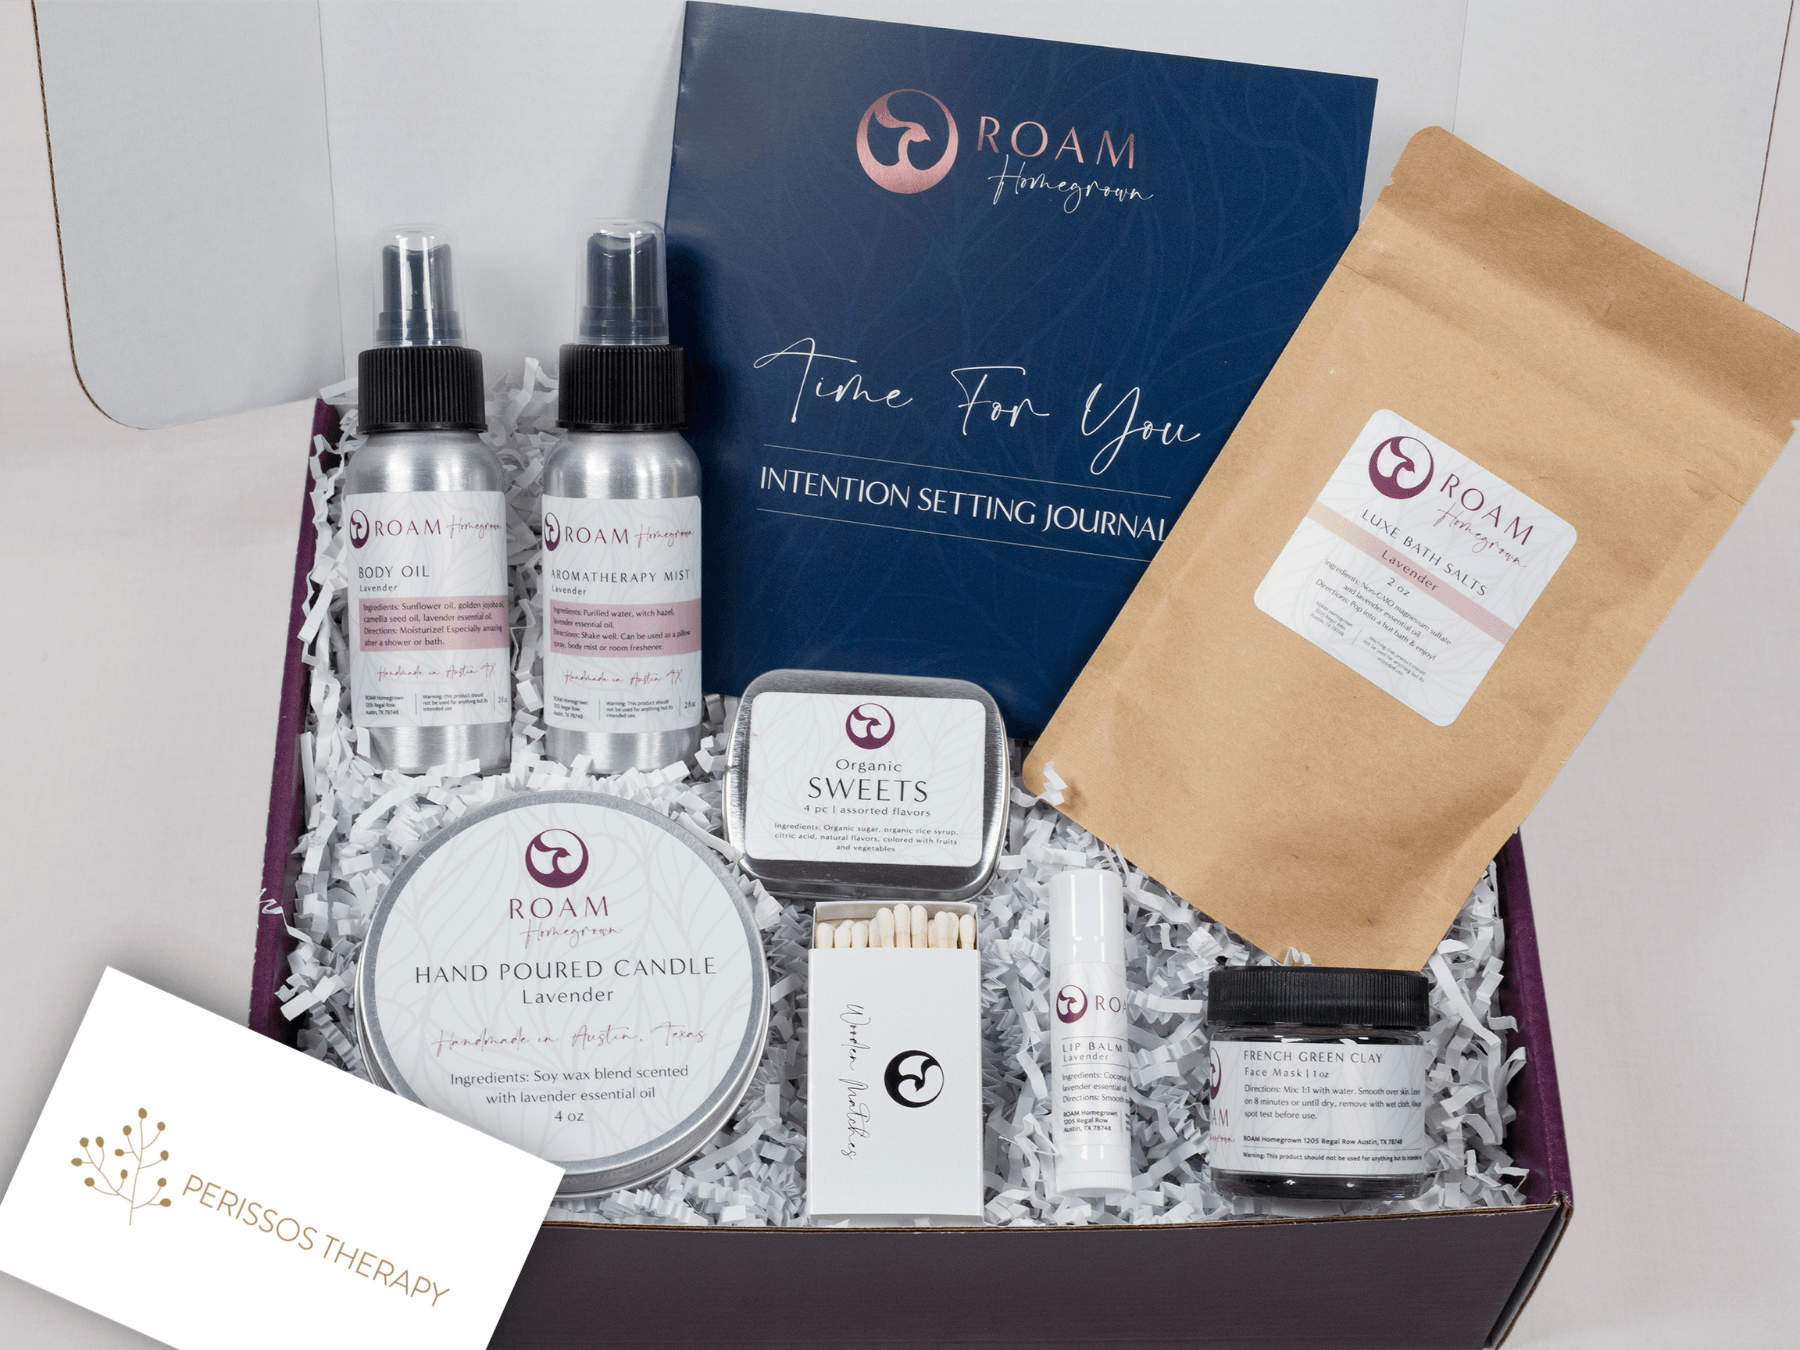 Permissos Therapy Self-Care Kit self-care gifts and sets ROAM Homegrown 